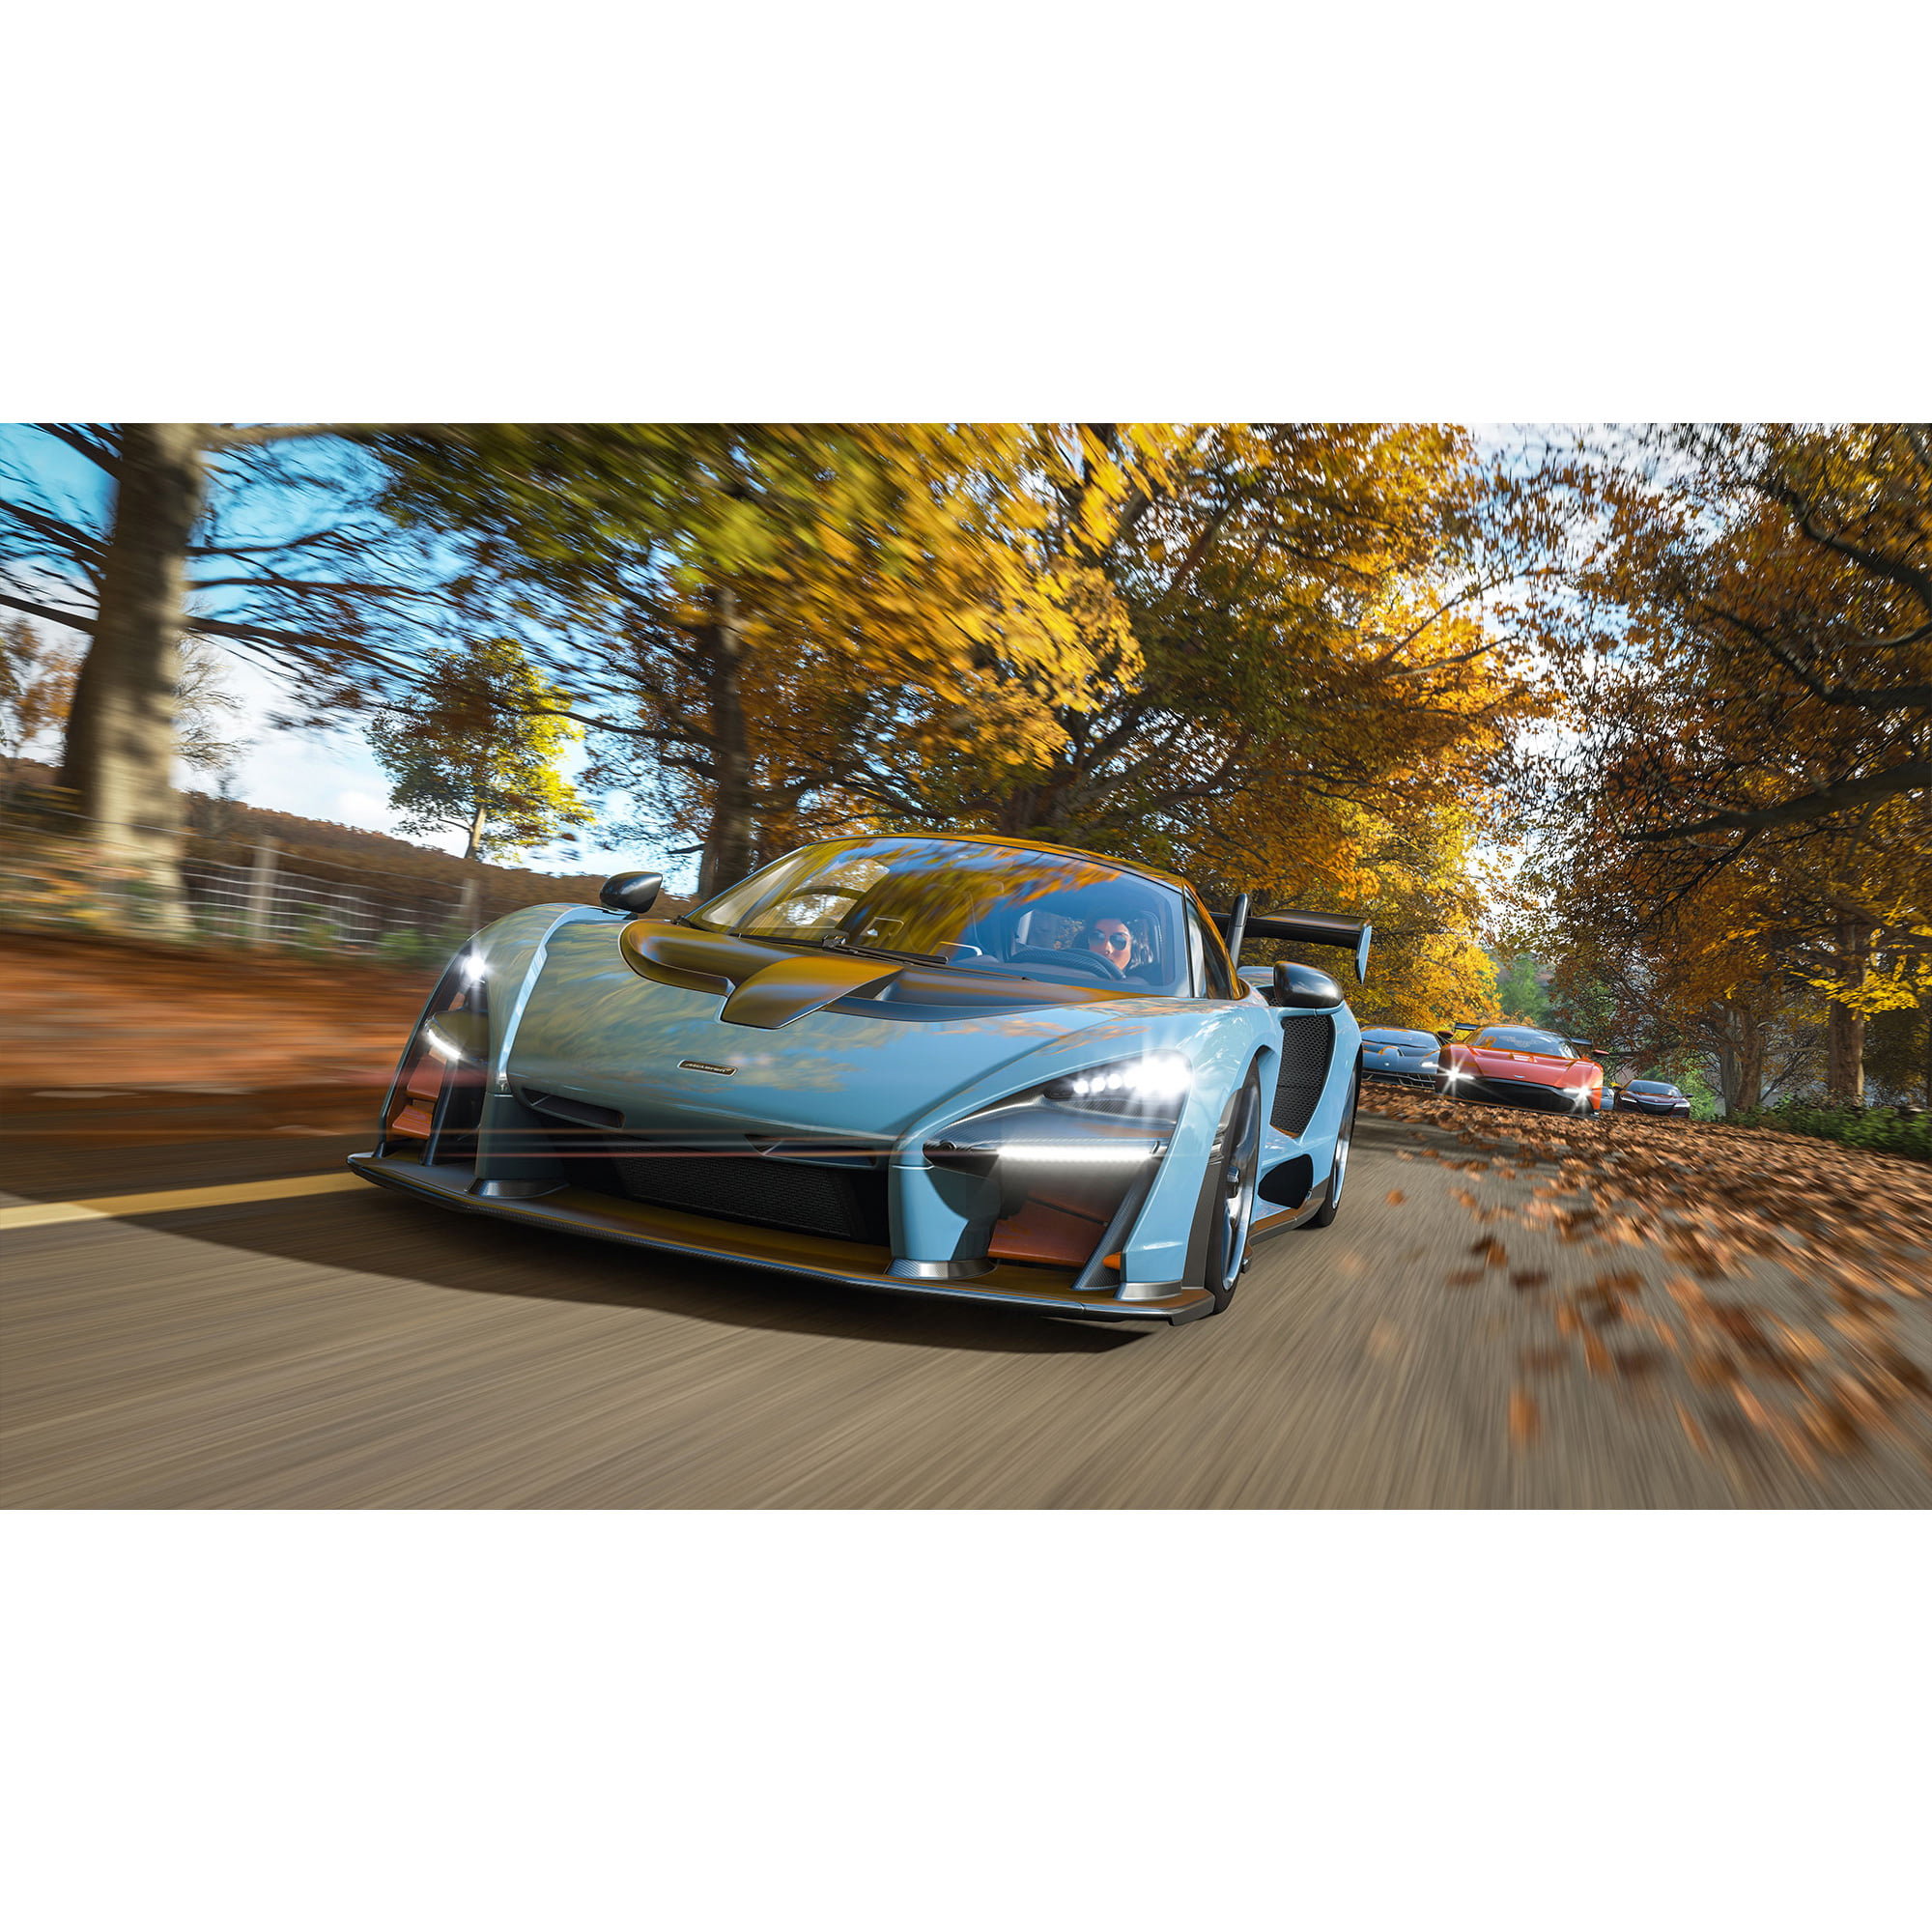 Forza Horizon 4 Now Available with Xbox Game Pass and Globally on Xbox One  and Windows 10 - Watch Ken Block Tearing up the Goodwood Estate - Xbox Wire